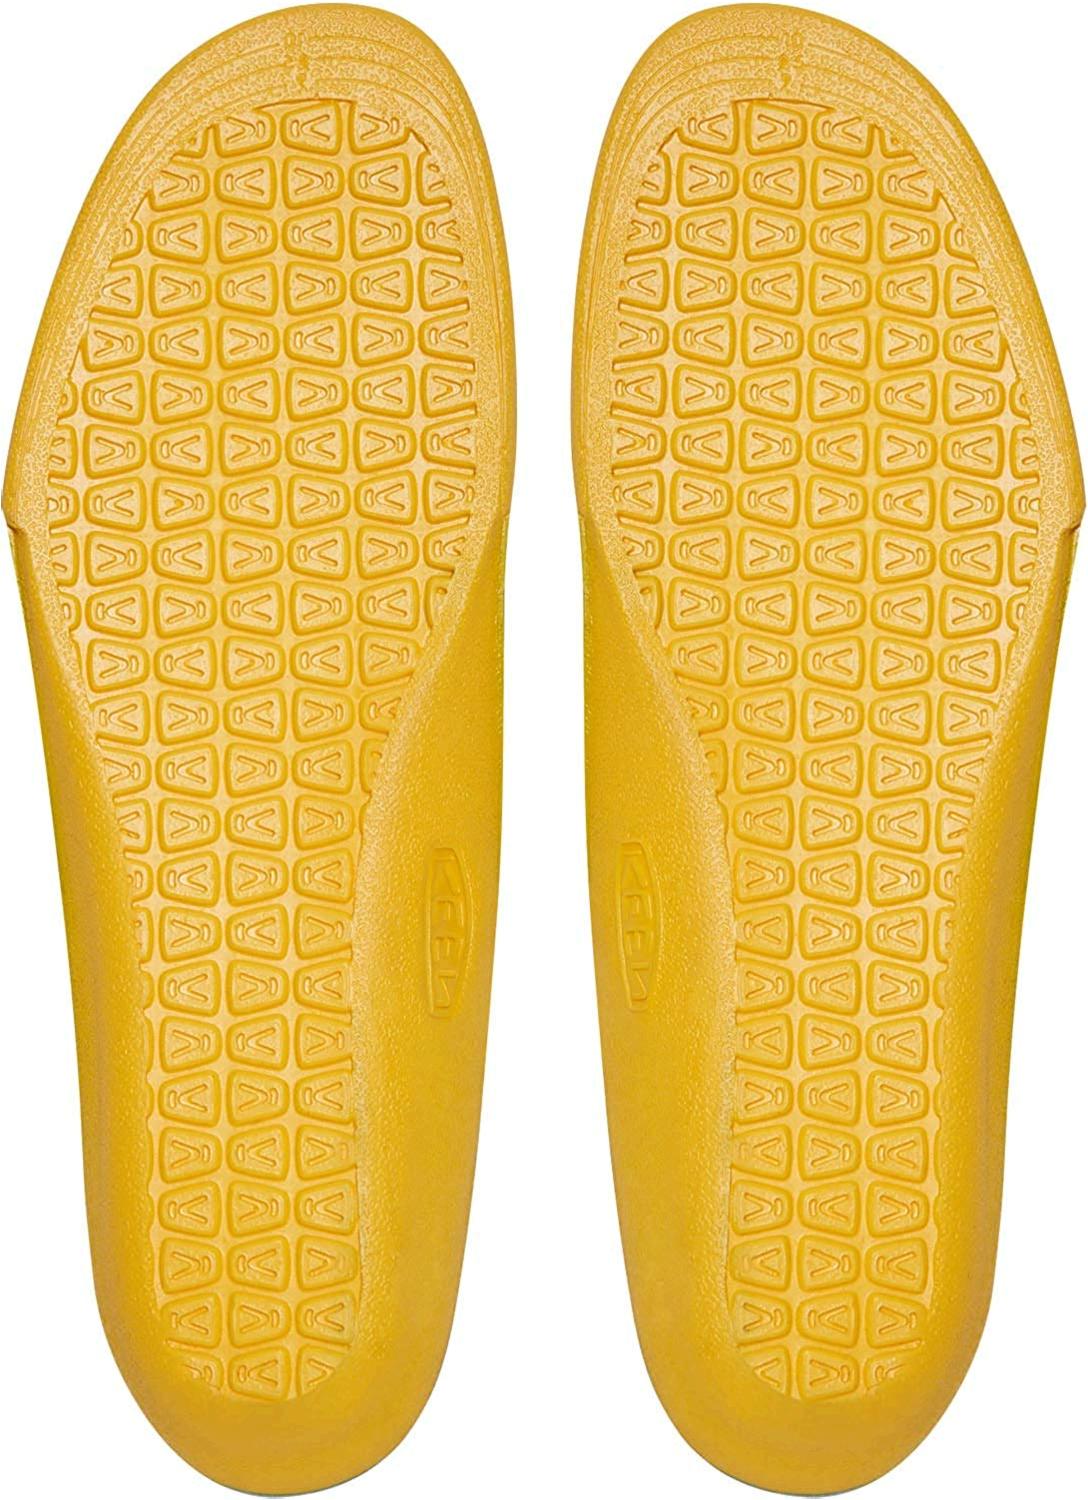 KEEN Utility K-20 Insole with Extra Cushion Full Length for, Black ...